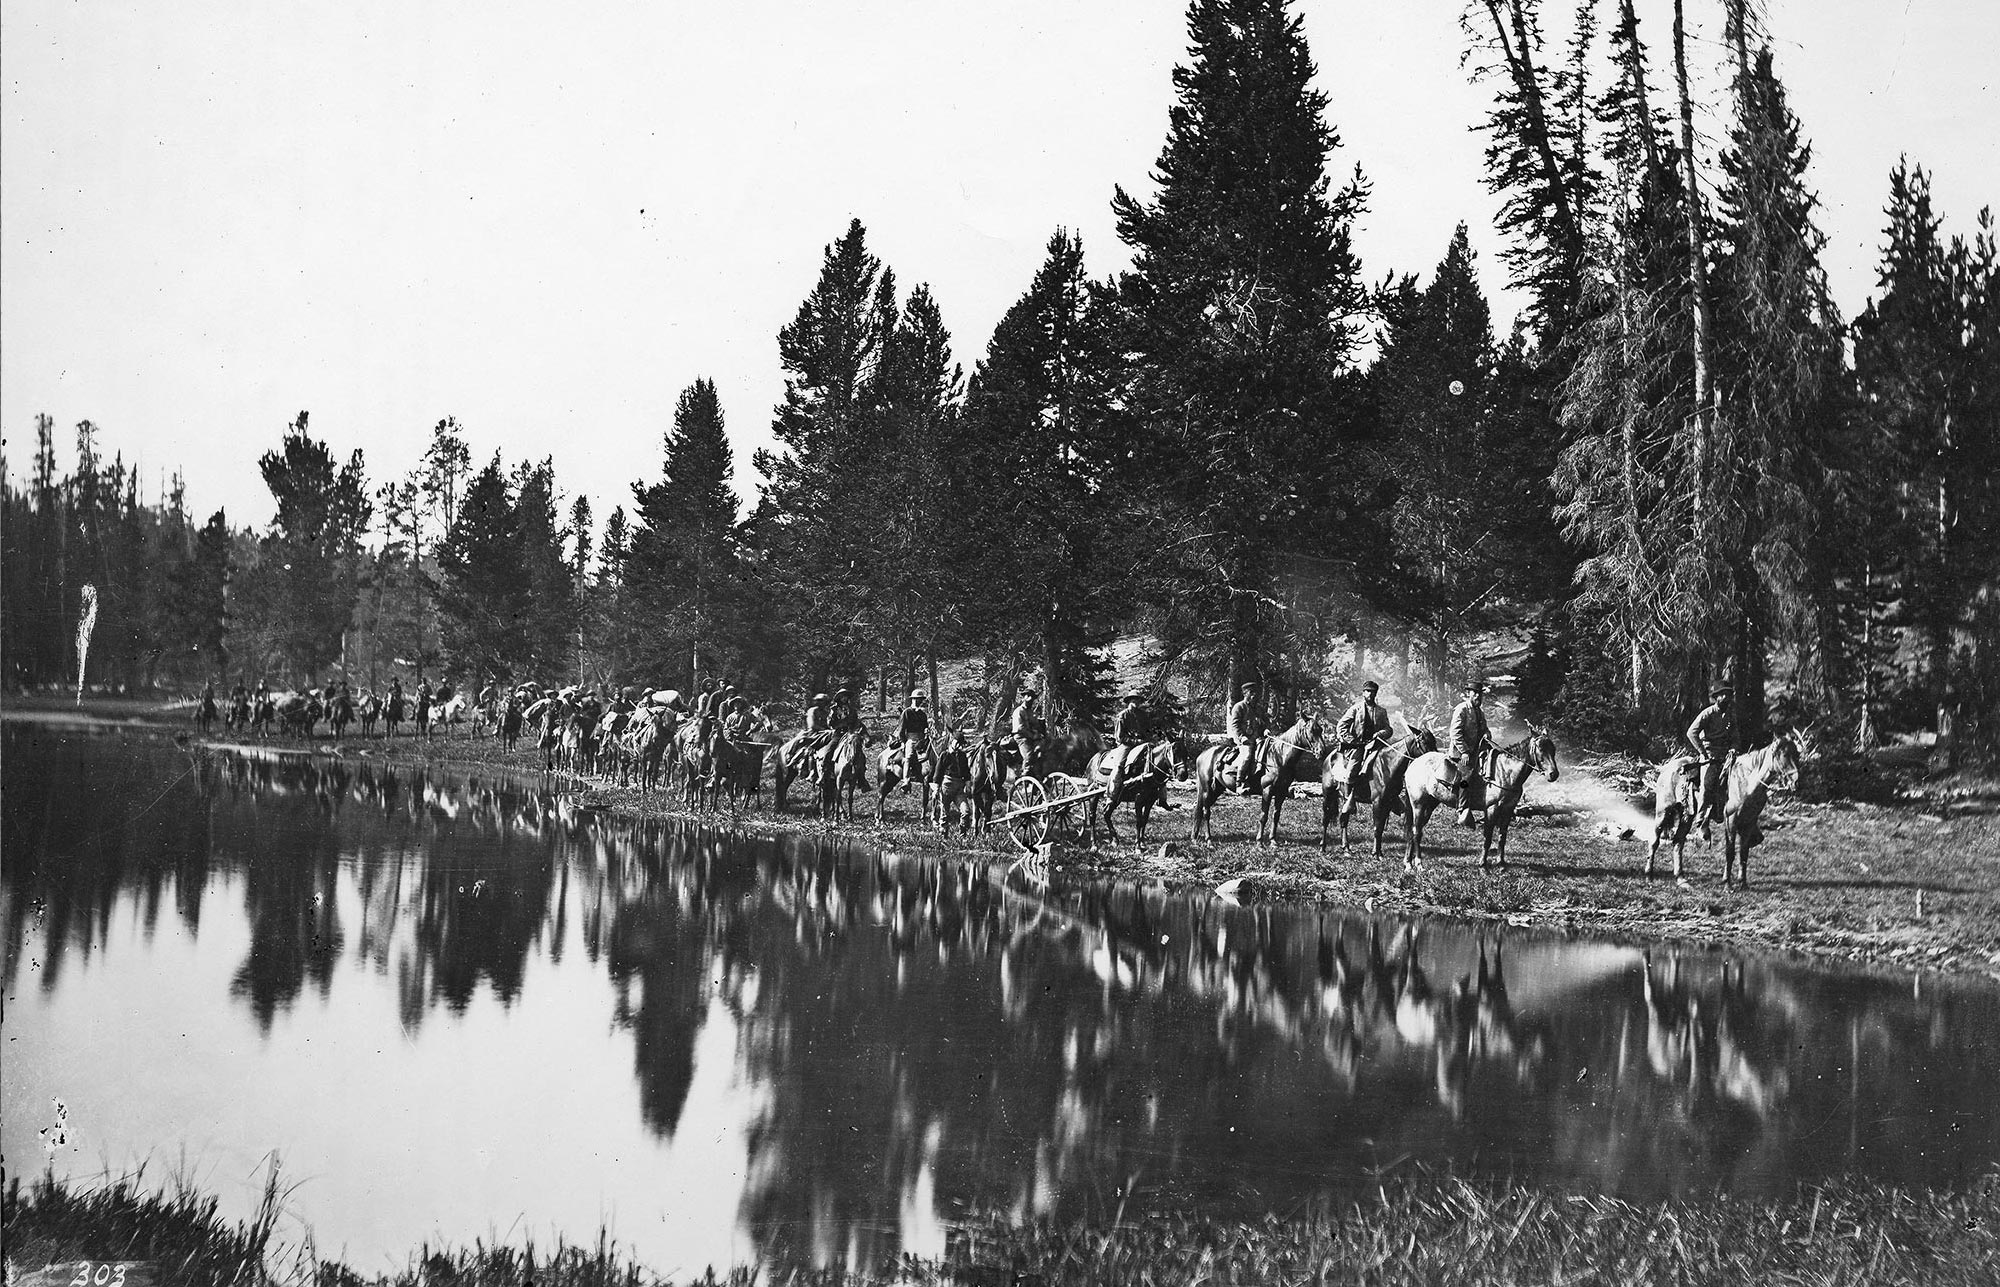 Survey Party, with pack train, en-route upon the trail between the Yellowstone River and East Fork, showing the manner in which all parties traverse these wilds